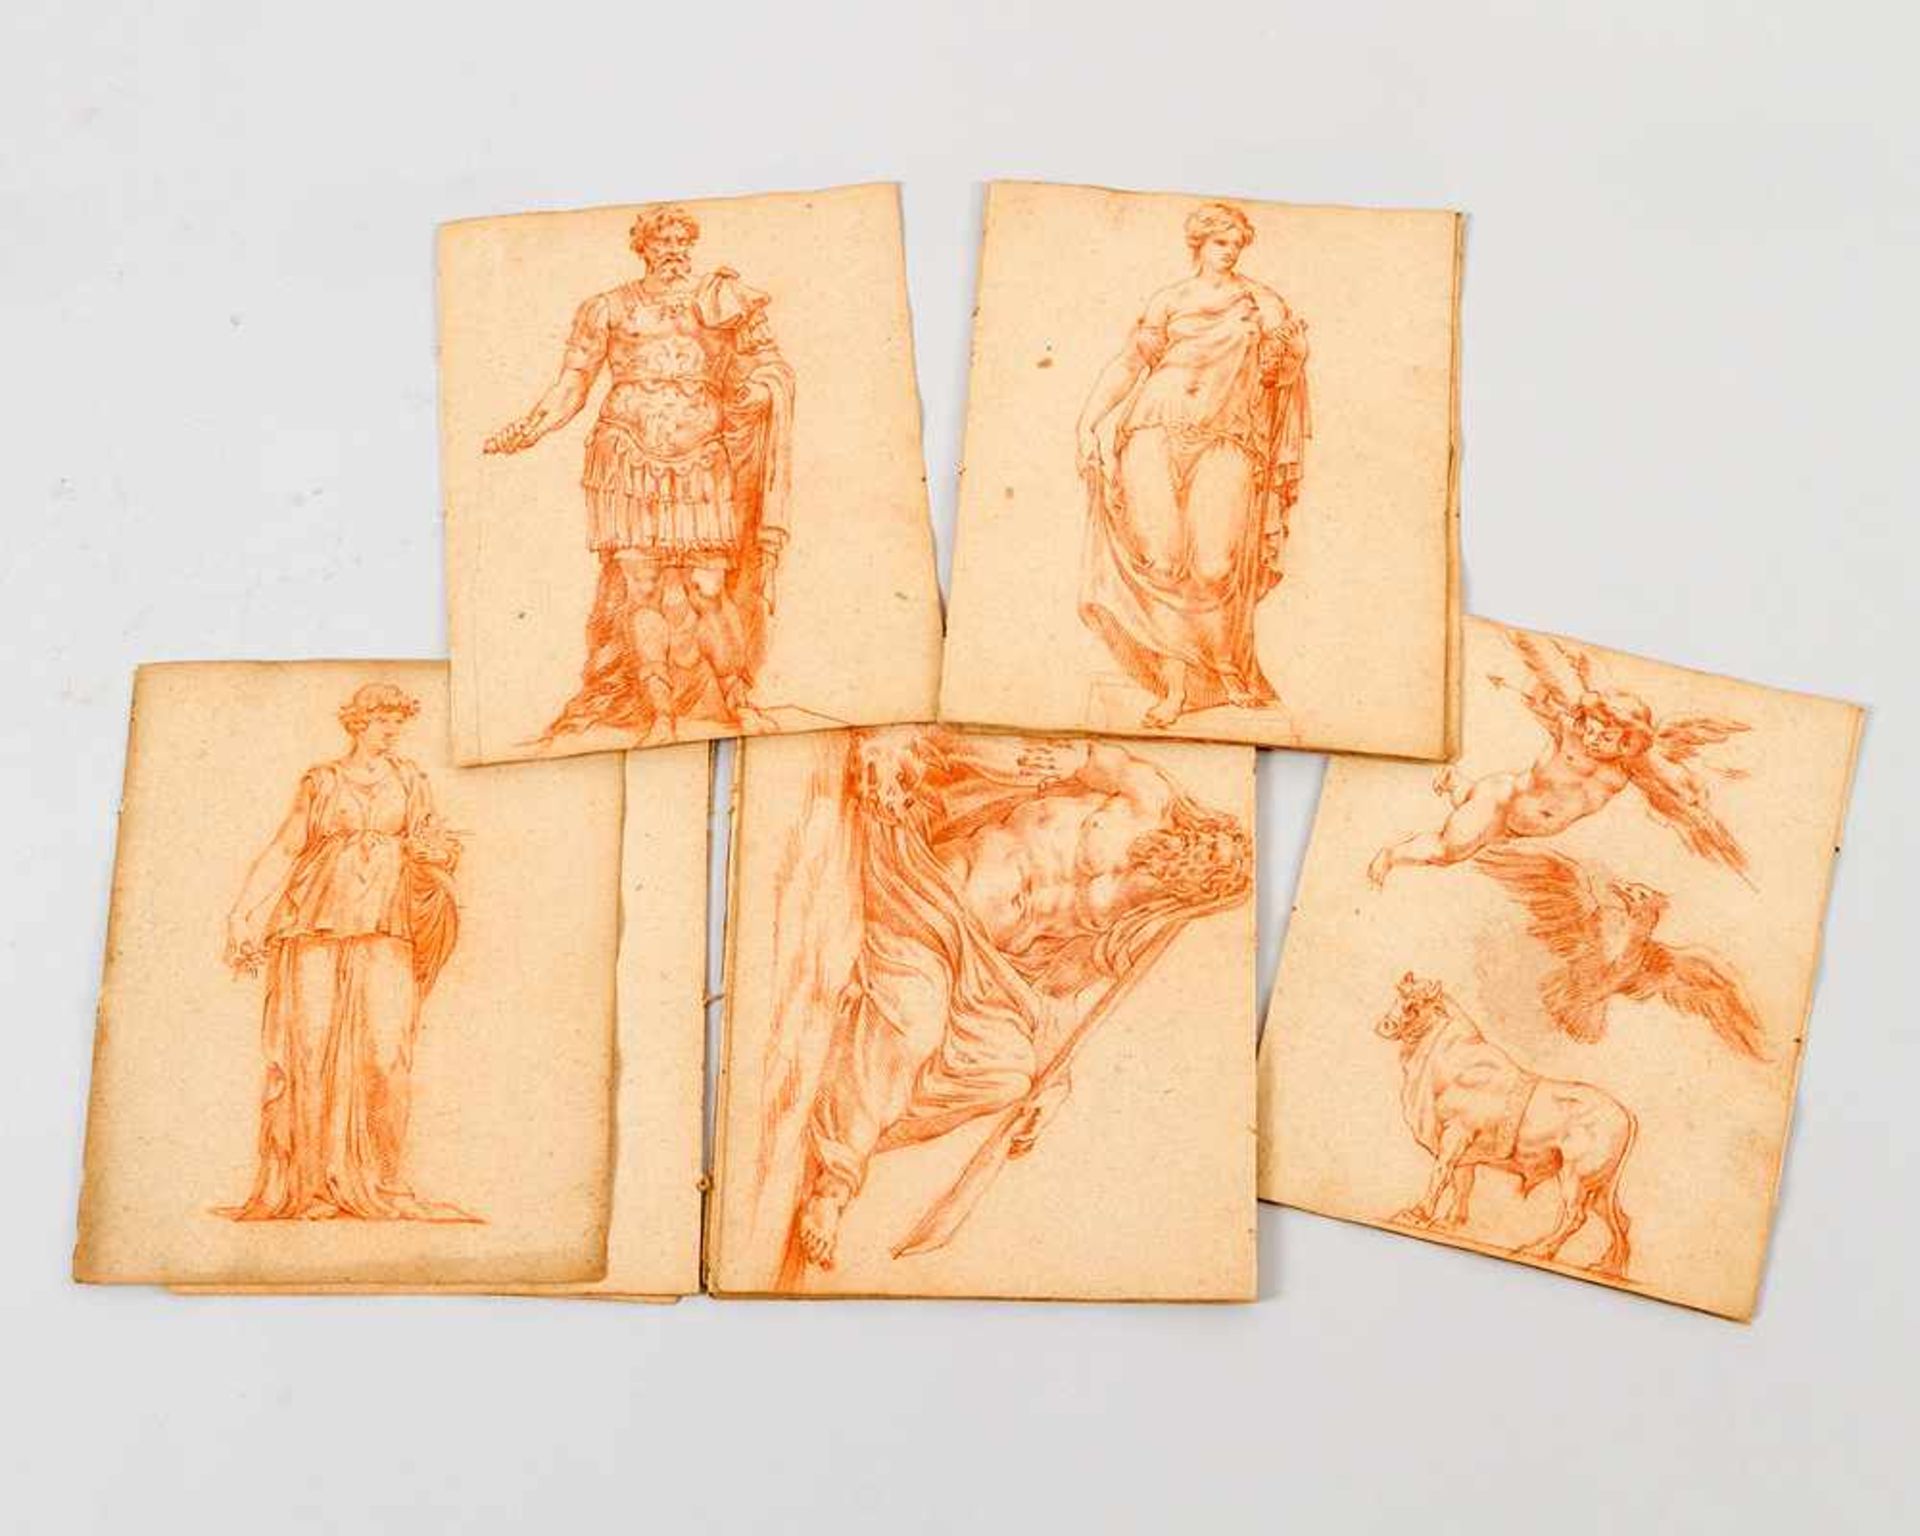 Mannerist Sketchbook, contains 21 drawings in red chalk of classical figures and sculptures and - Bild 2 aus 3